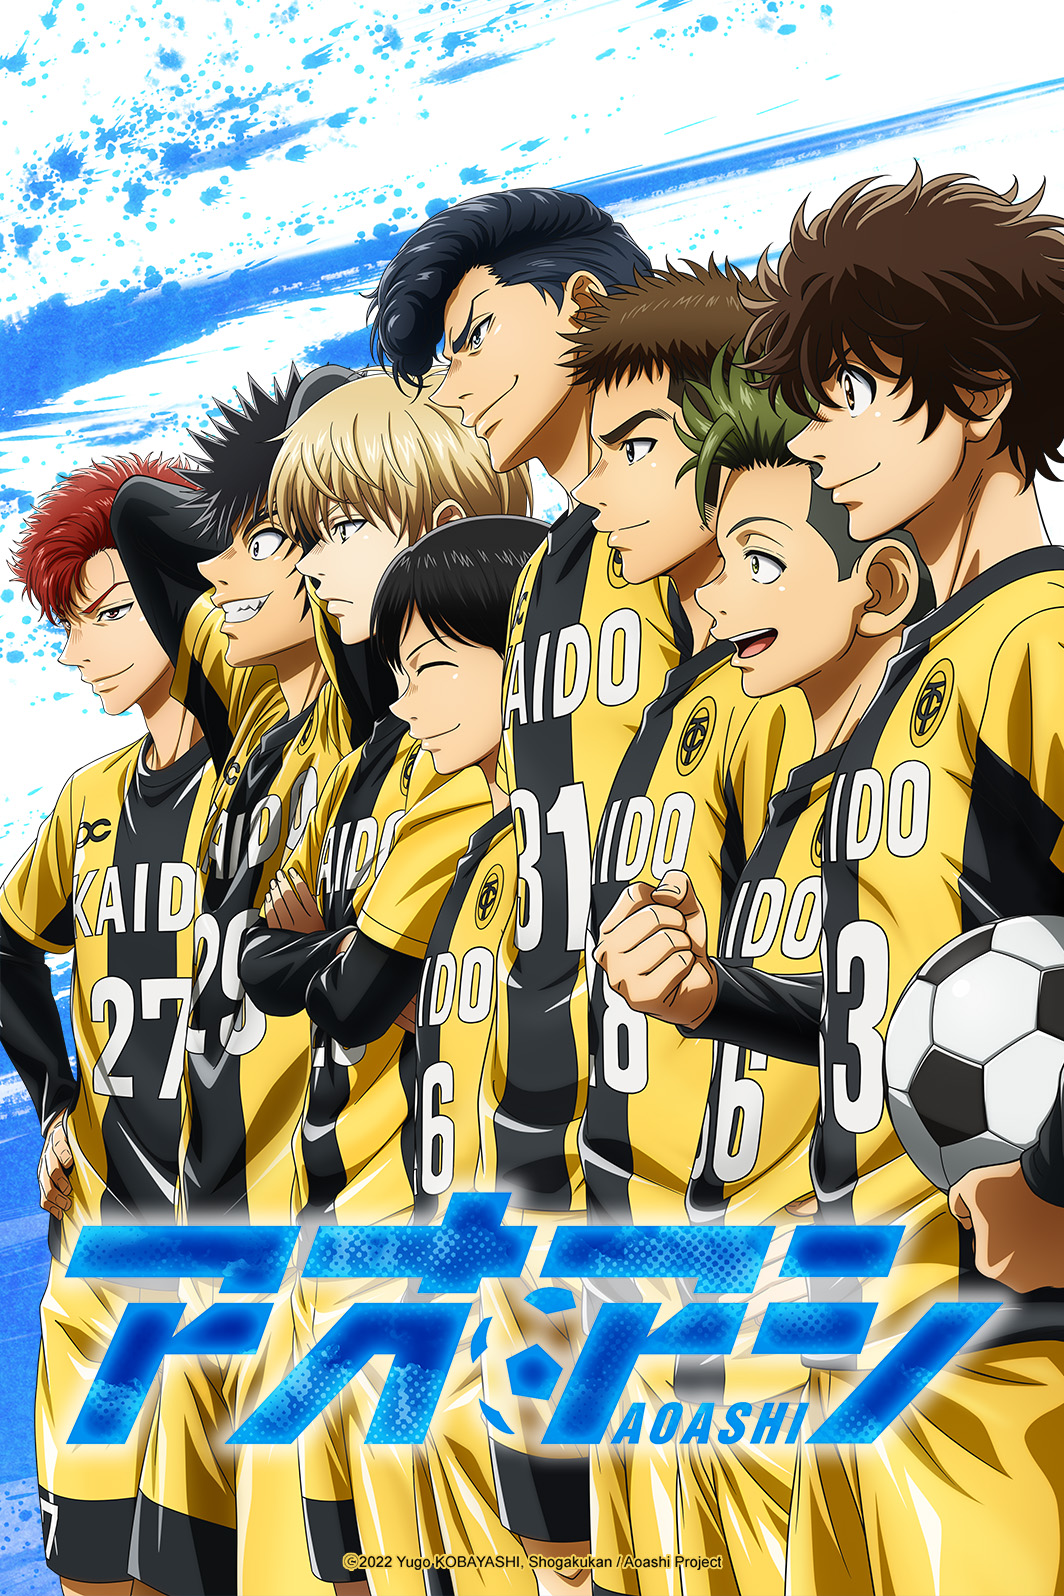 Ao Ashi - Playmaker  ep 1 vostfr - passionjapan